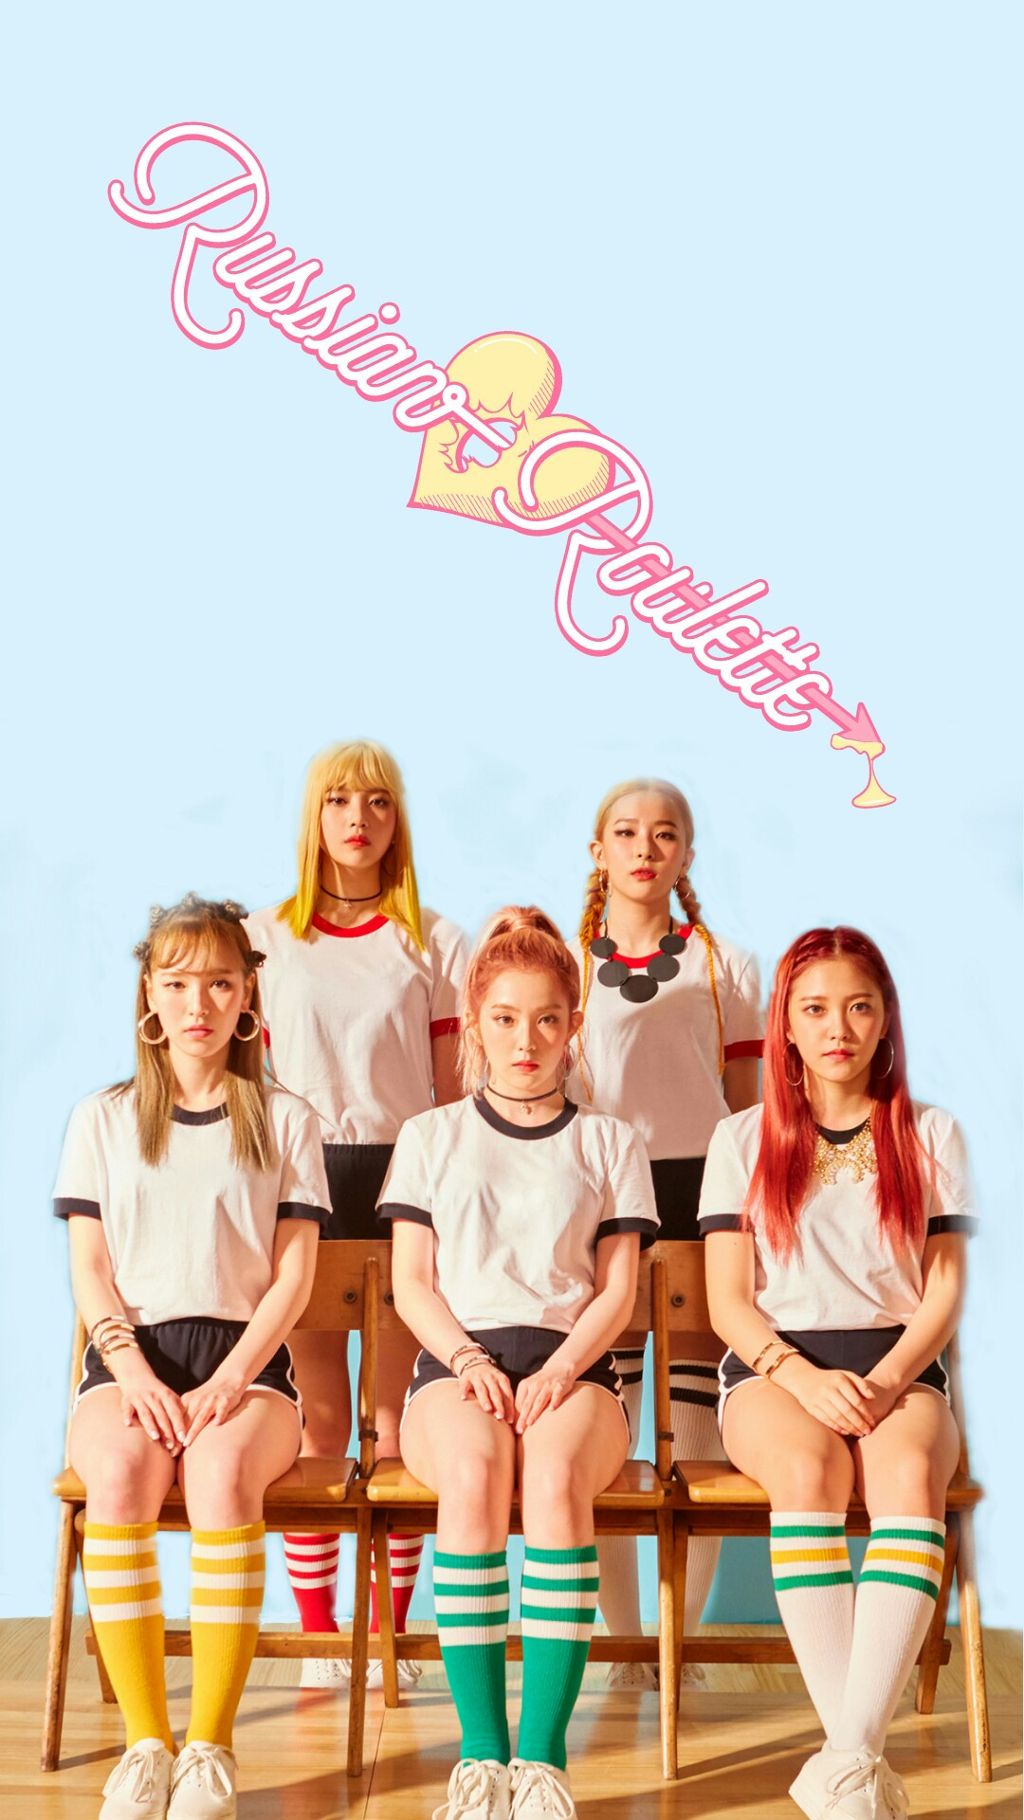 I Was Bored So I Made A Russian Roulette Wallpaper - Red Velvet Russian Roulette - HD Wallpaper 